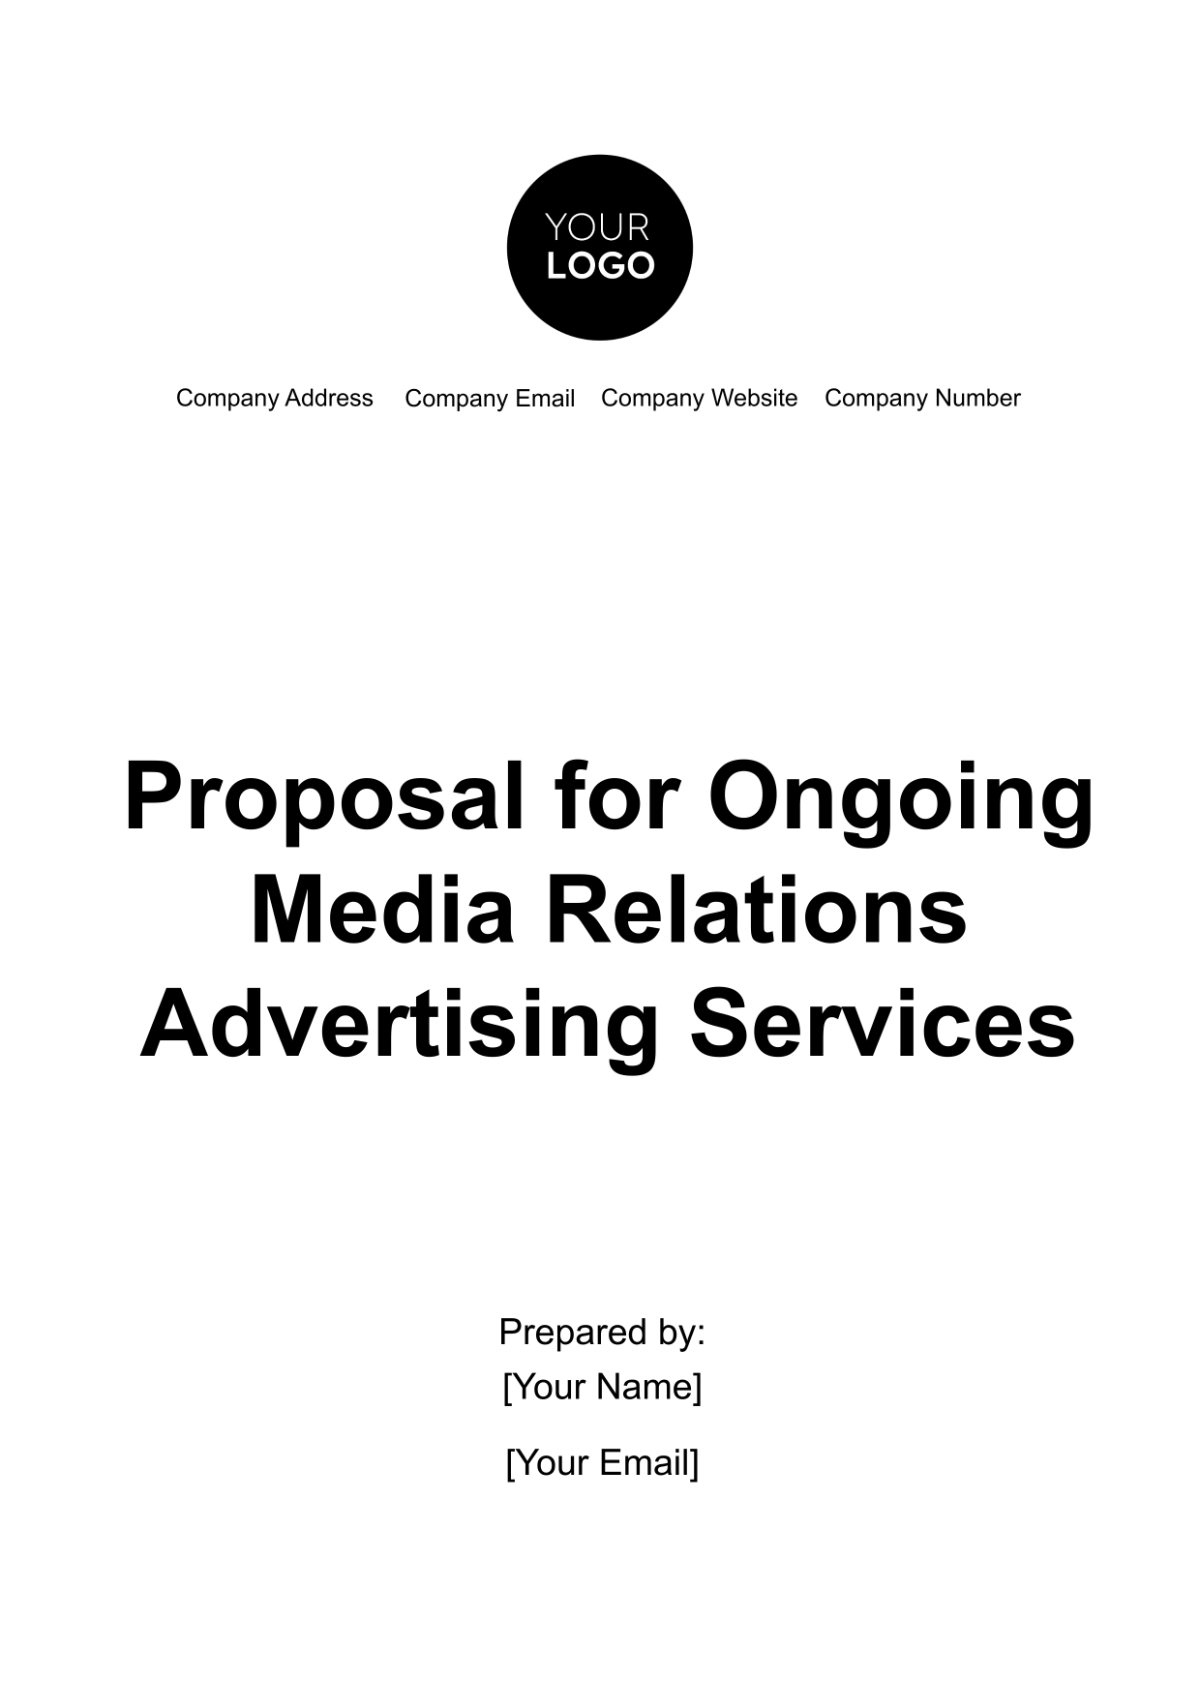 Free Proposal for Ongoing Media Relations Advertising Services Template